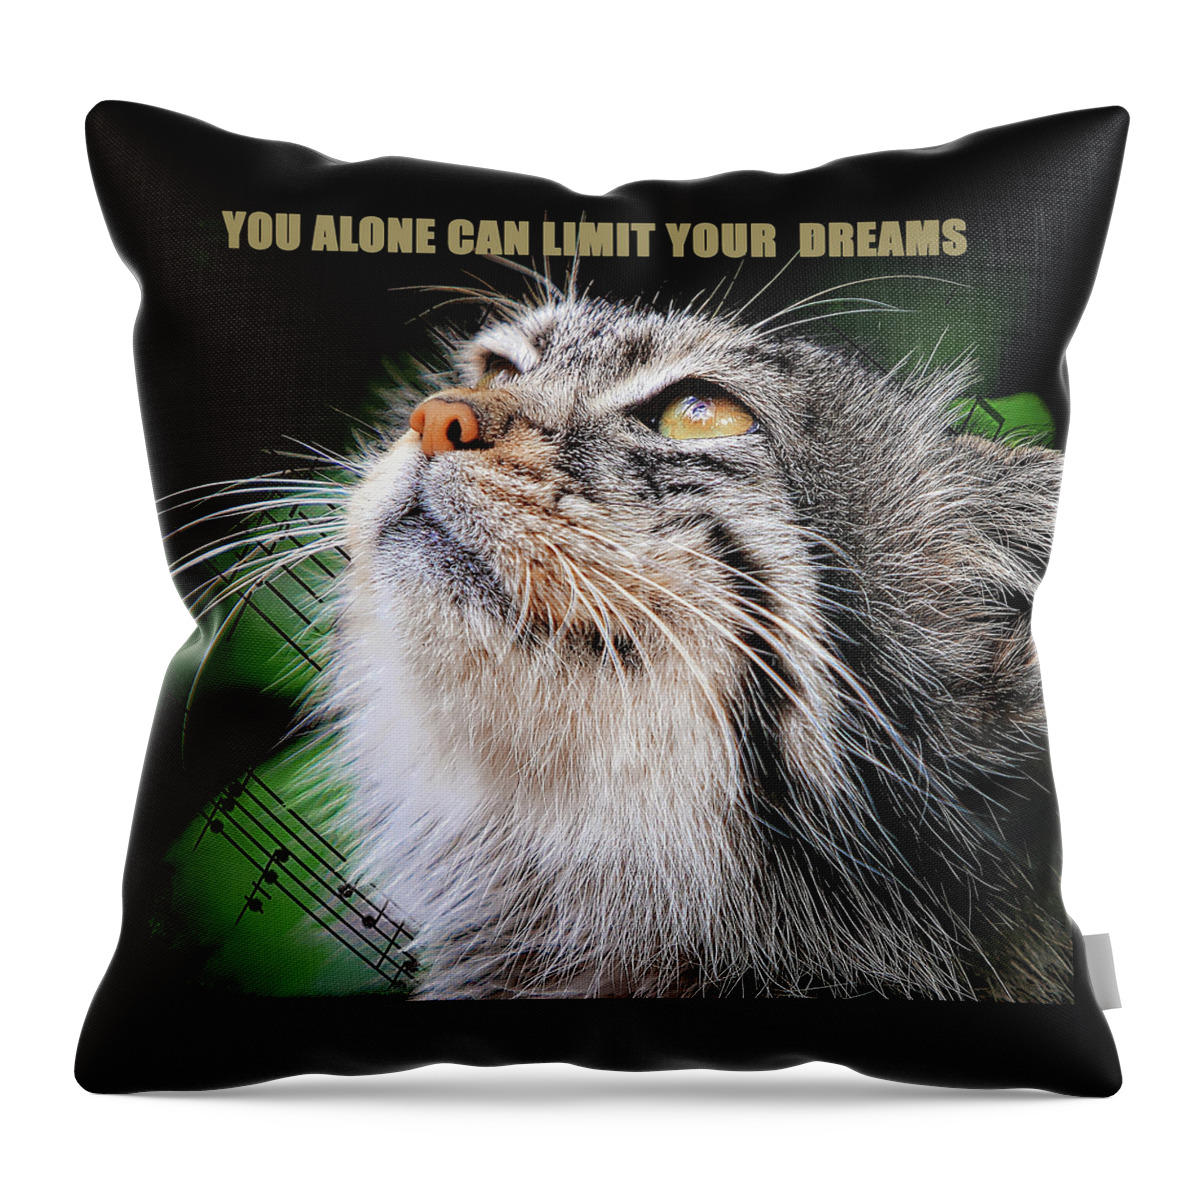 Cat Throw Pillow featuring the digital art No Limit On Your Dreams by Michelle Liebenberg